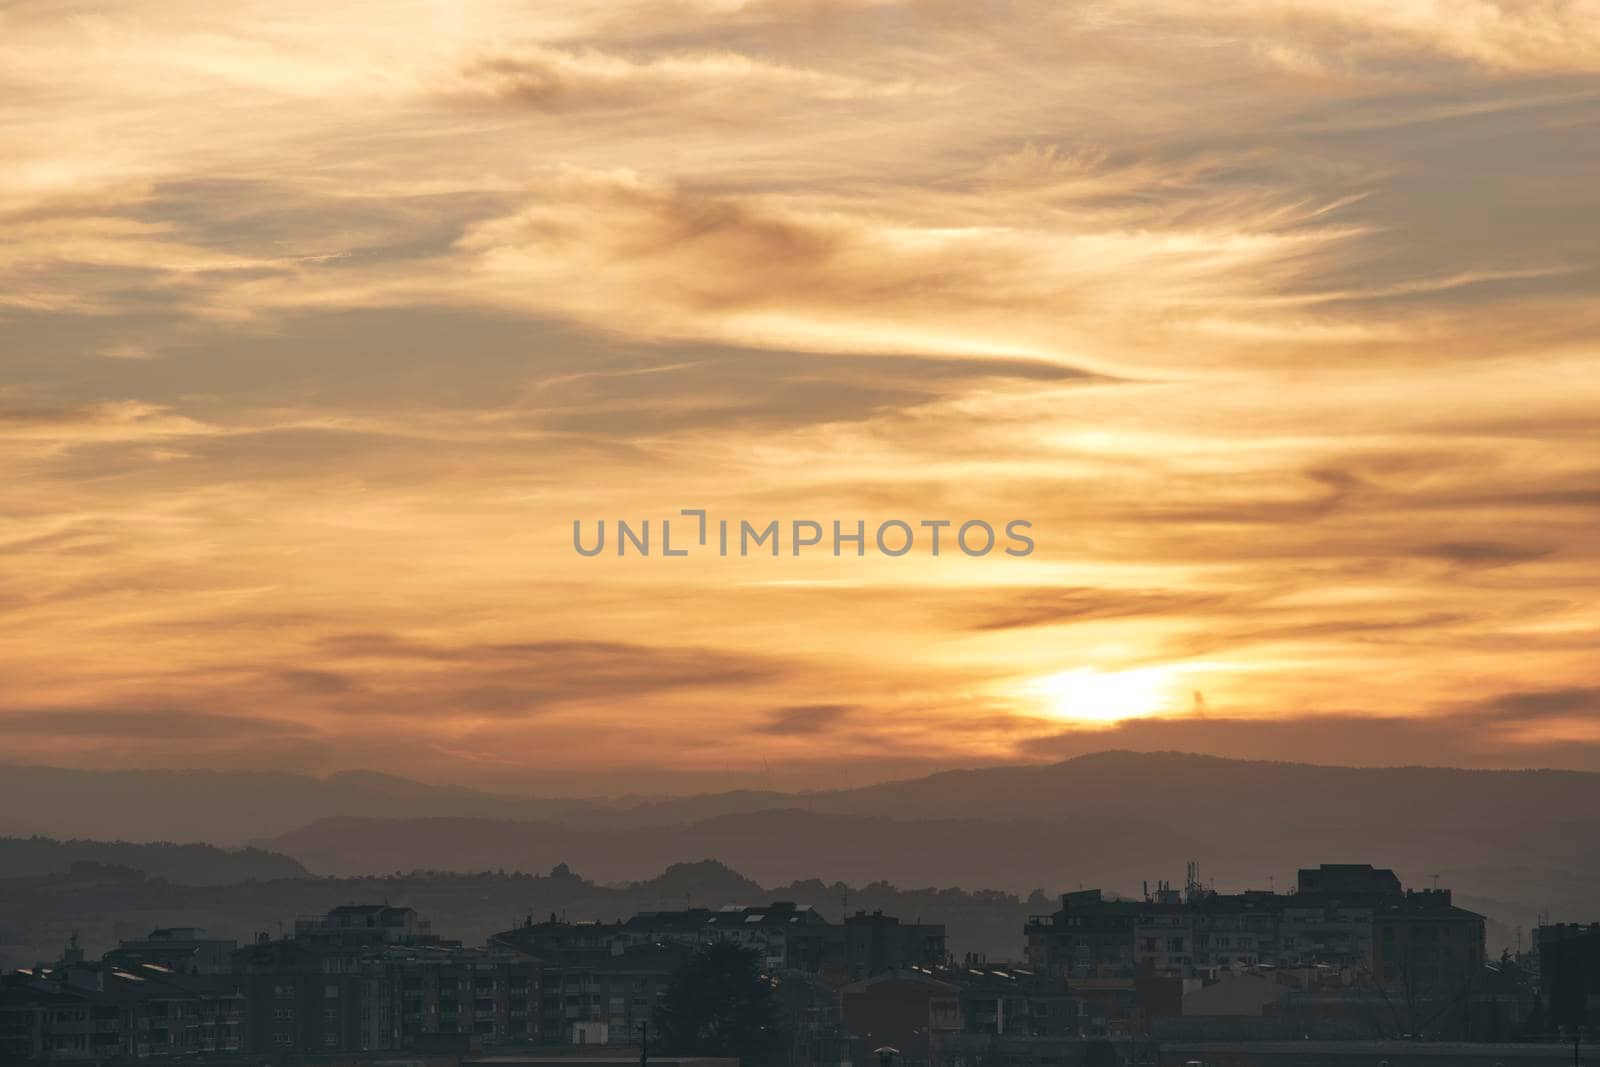 Beautiful sunset view of Igualada city under a cloudy sky and some mountains in the background